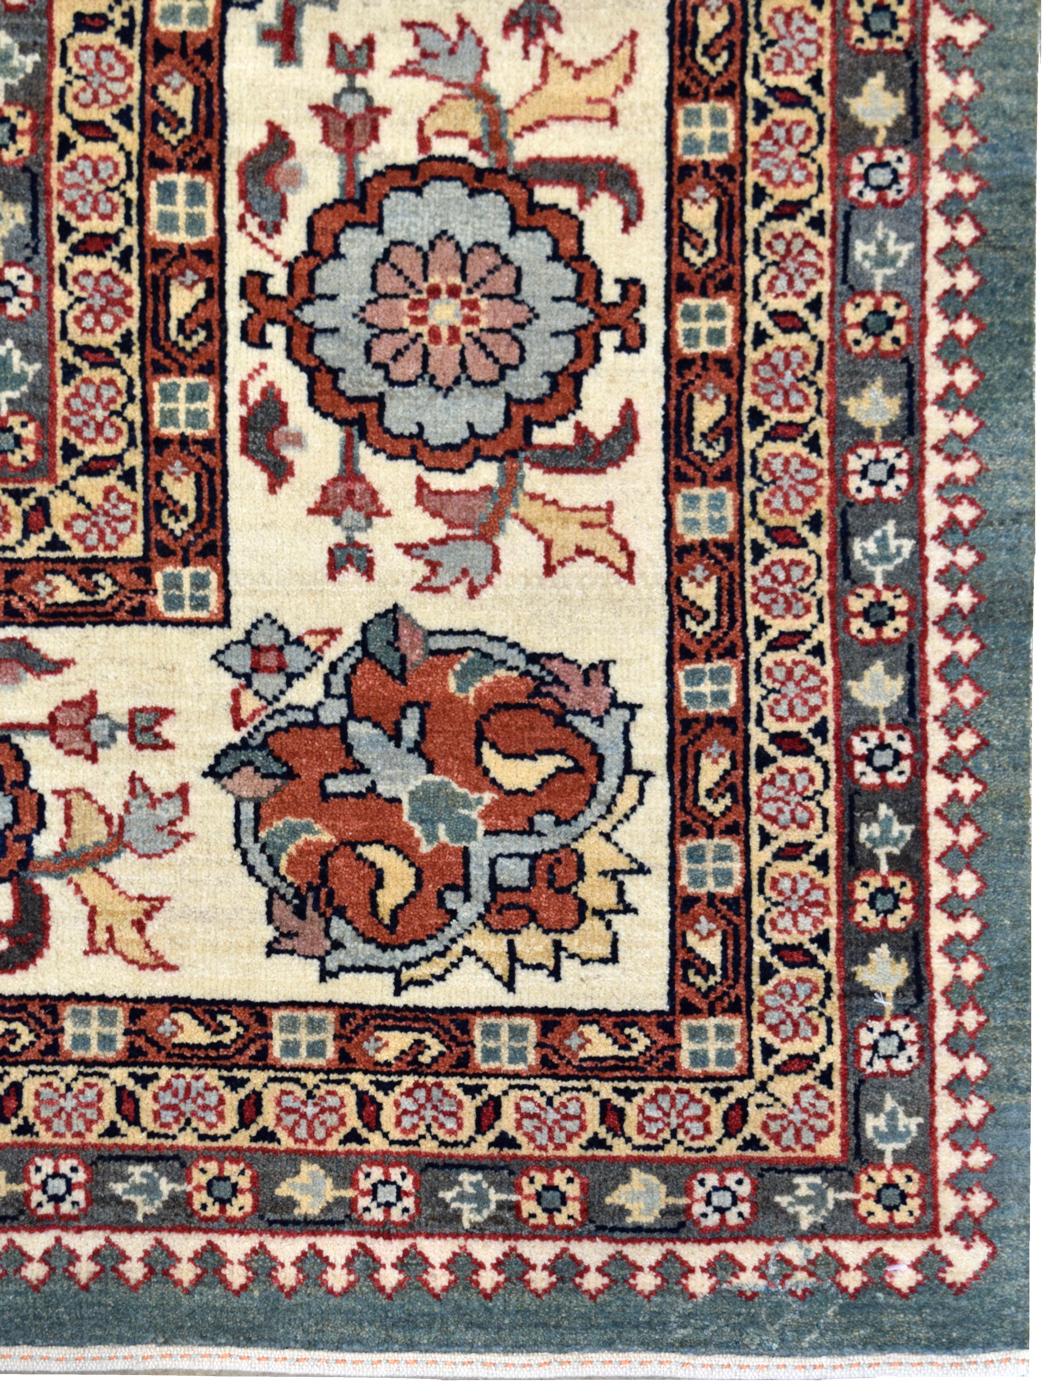 Hand-Knotted Wool, Persian Bakhtiari Carpet, Cream, Blue, Orange, Red, 10’ x 13’ For Sale 4